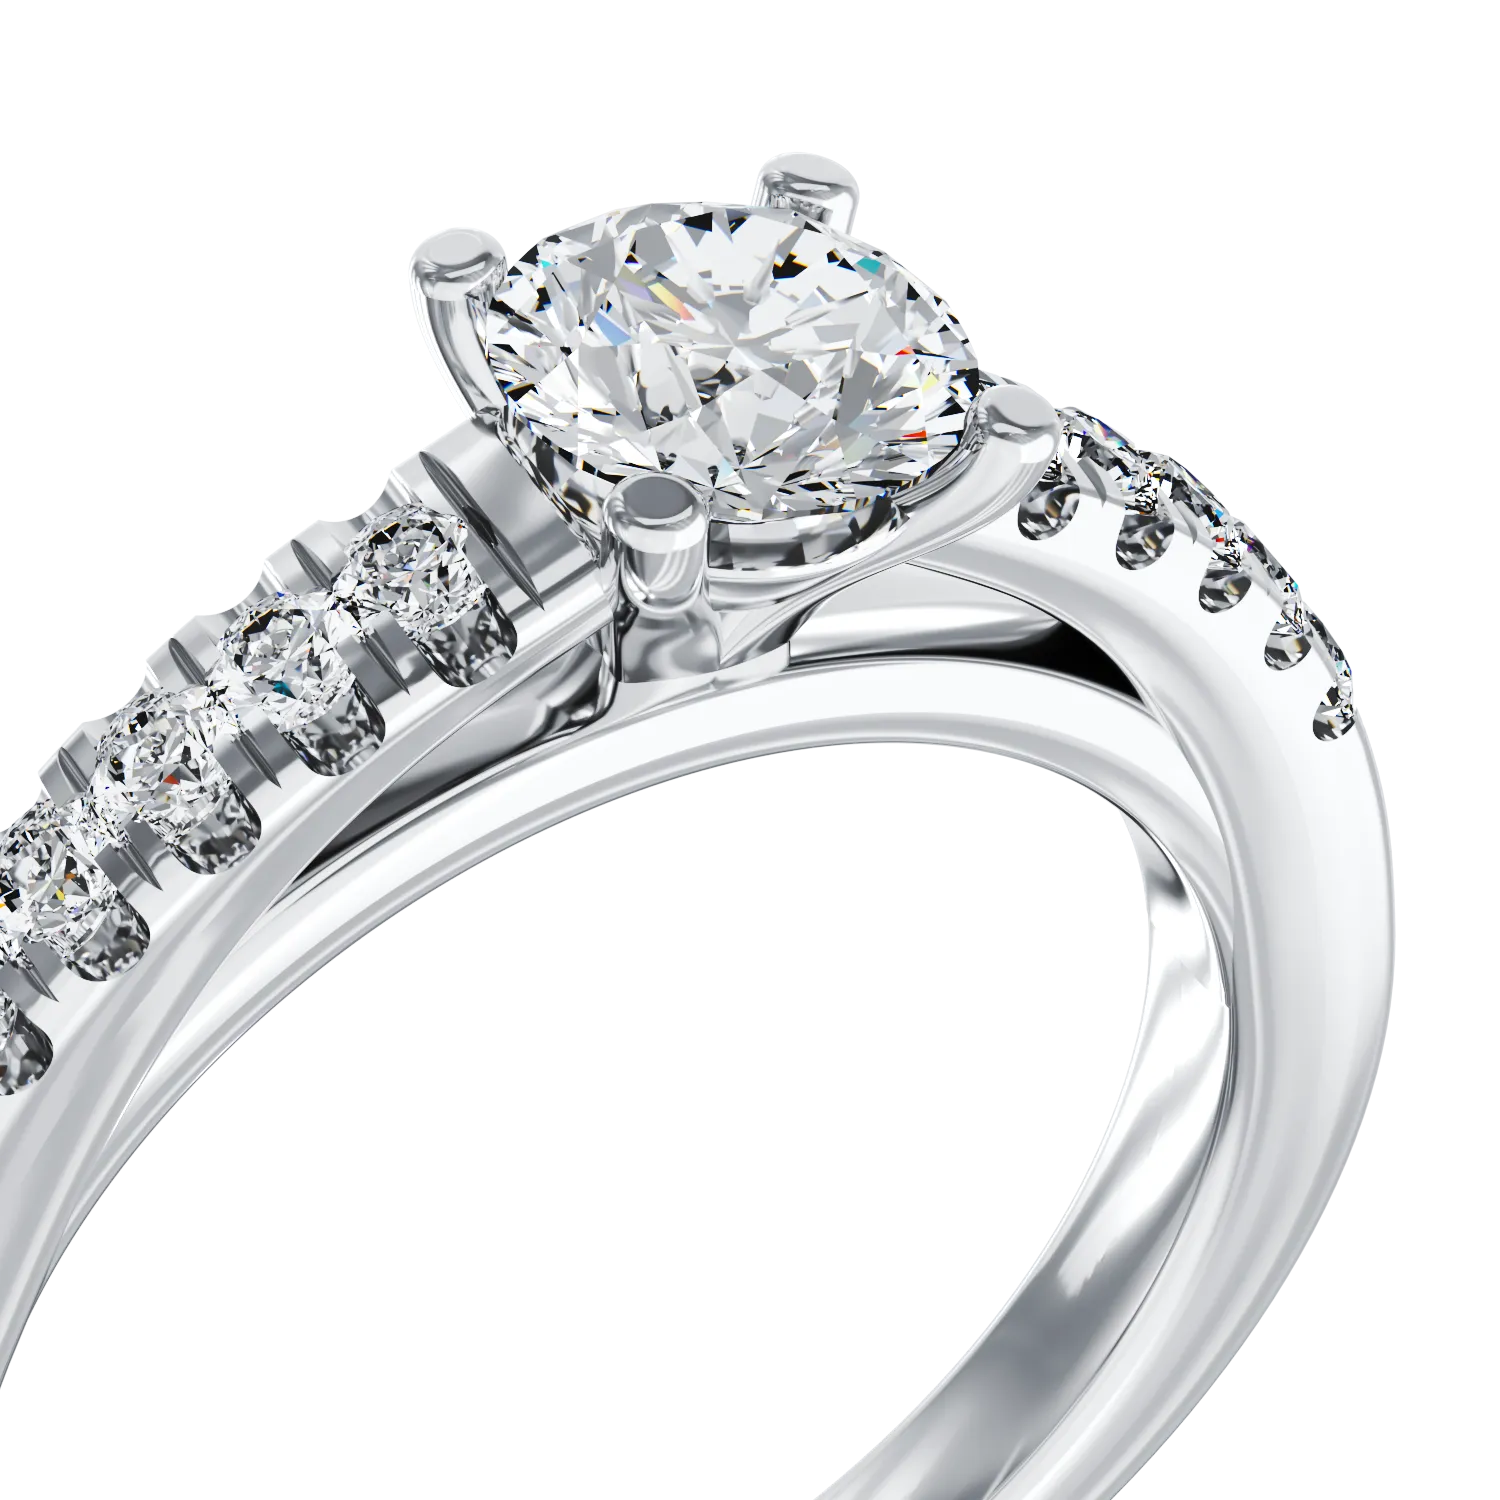 18K white gold engagement ring with diamond of 0.5ct and diamonds 0.16ct